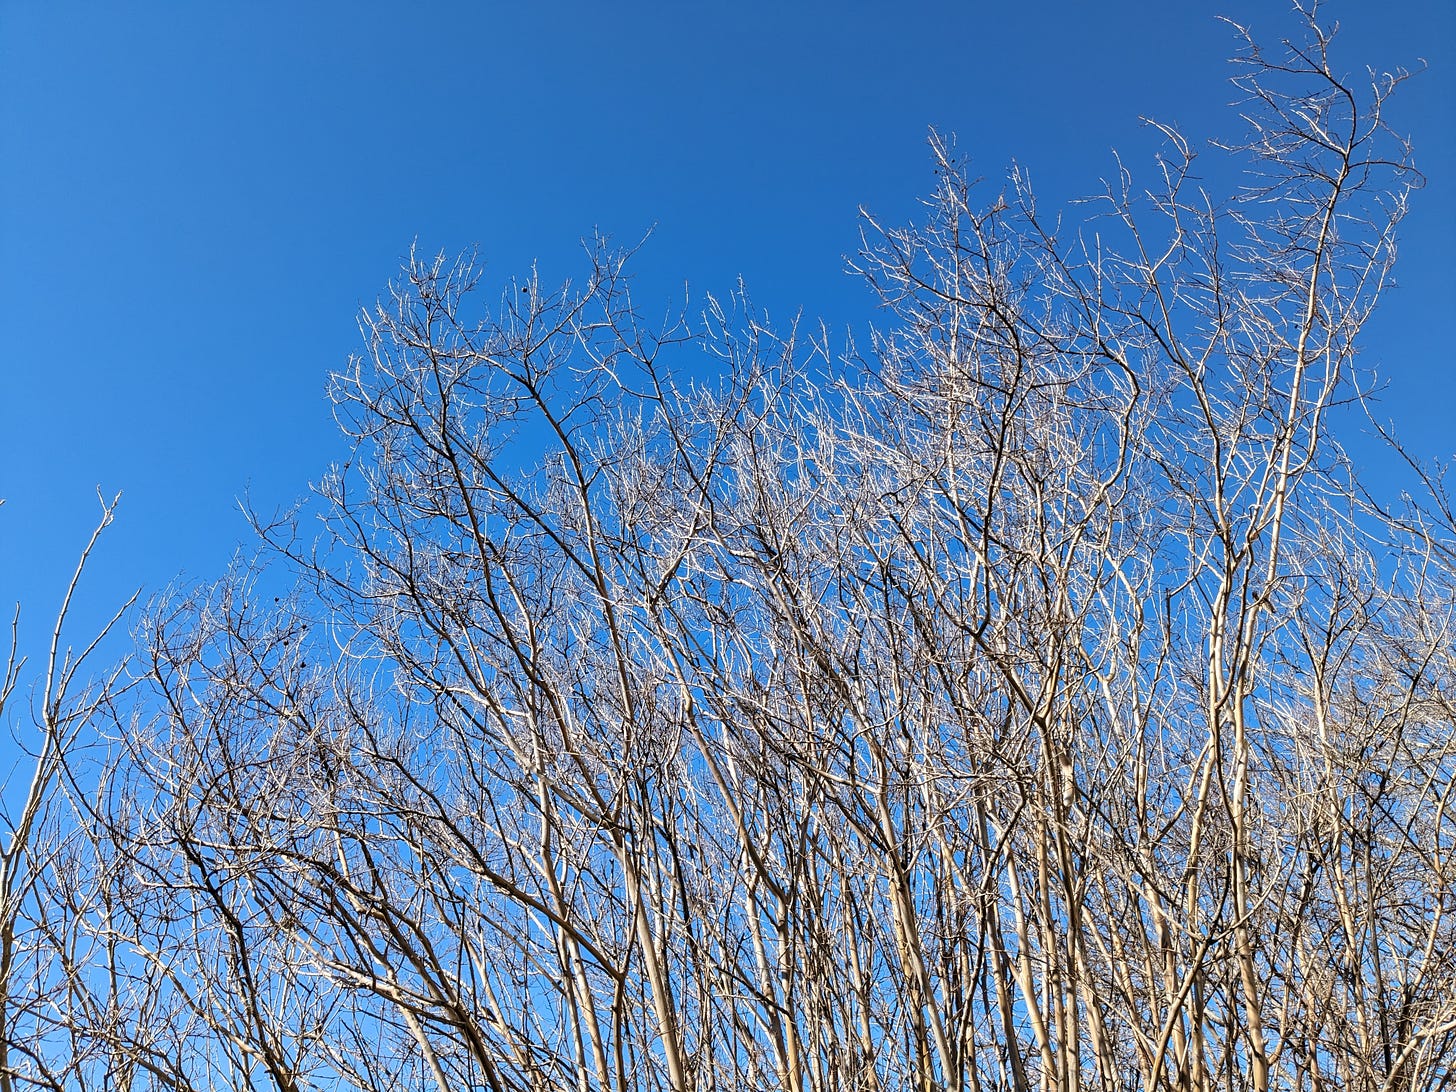 Texas; crowd of bare branches reaching skyward